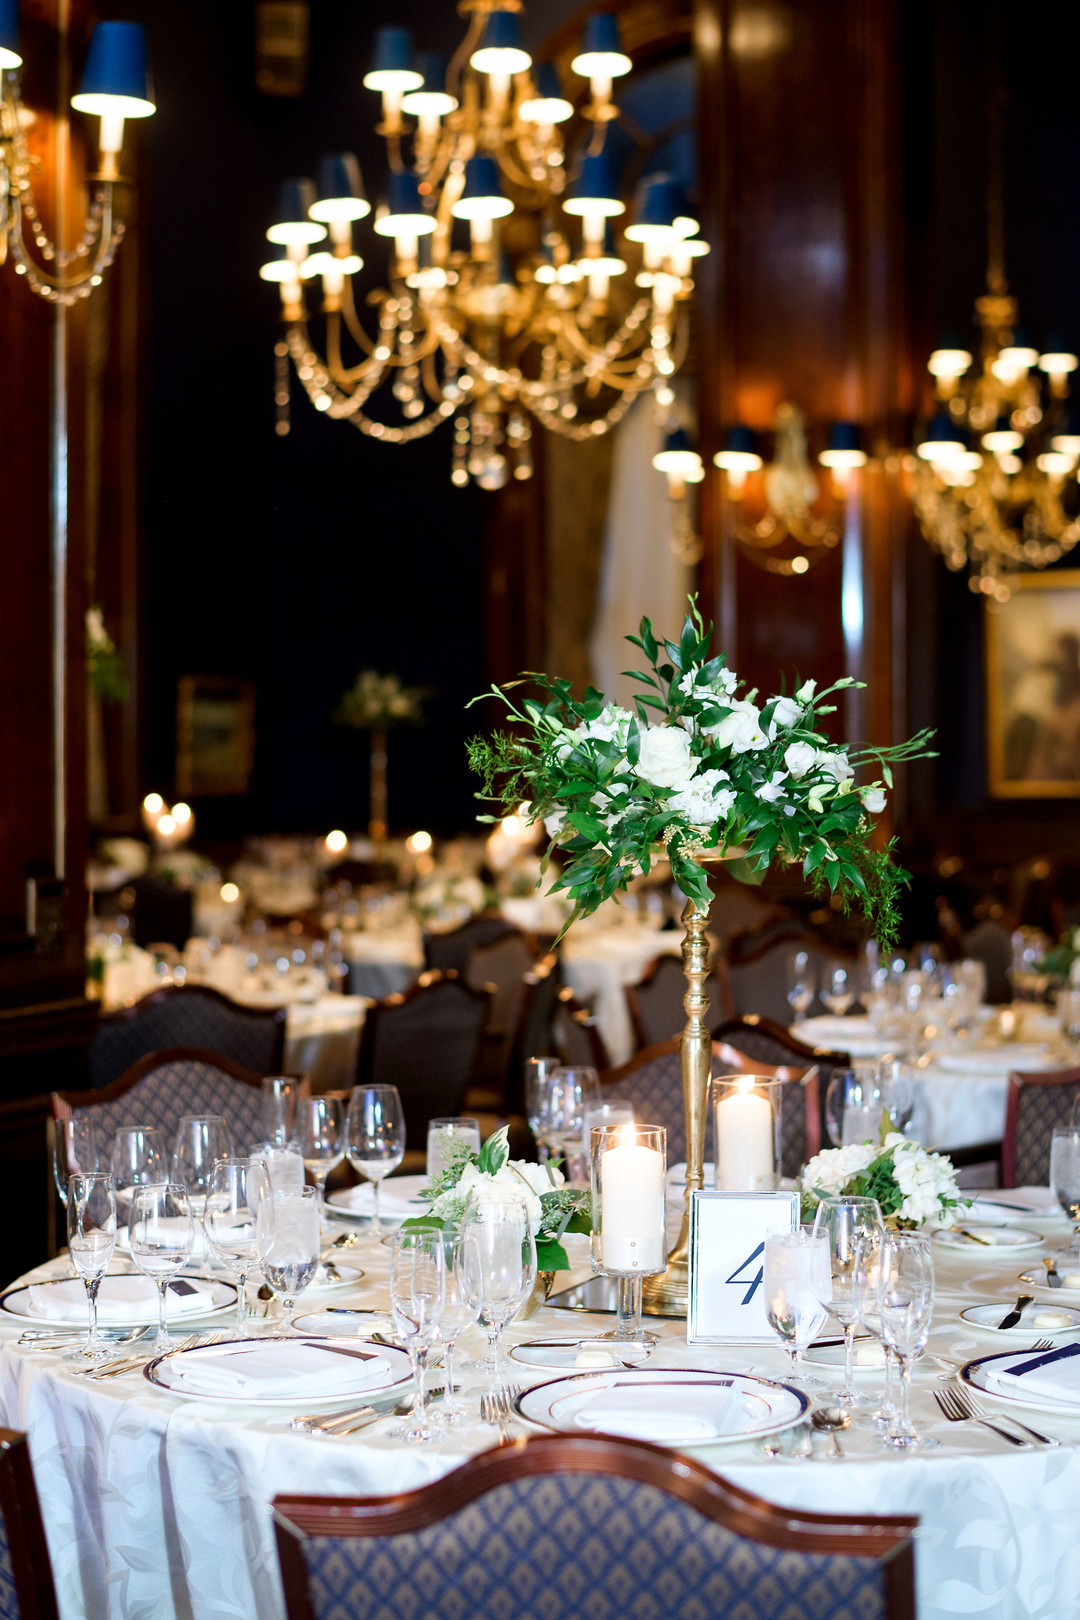 Romantic Chicago Fall Wedding at Union League Club of Chicago captured by Julia Franzosa Photography.